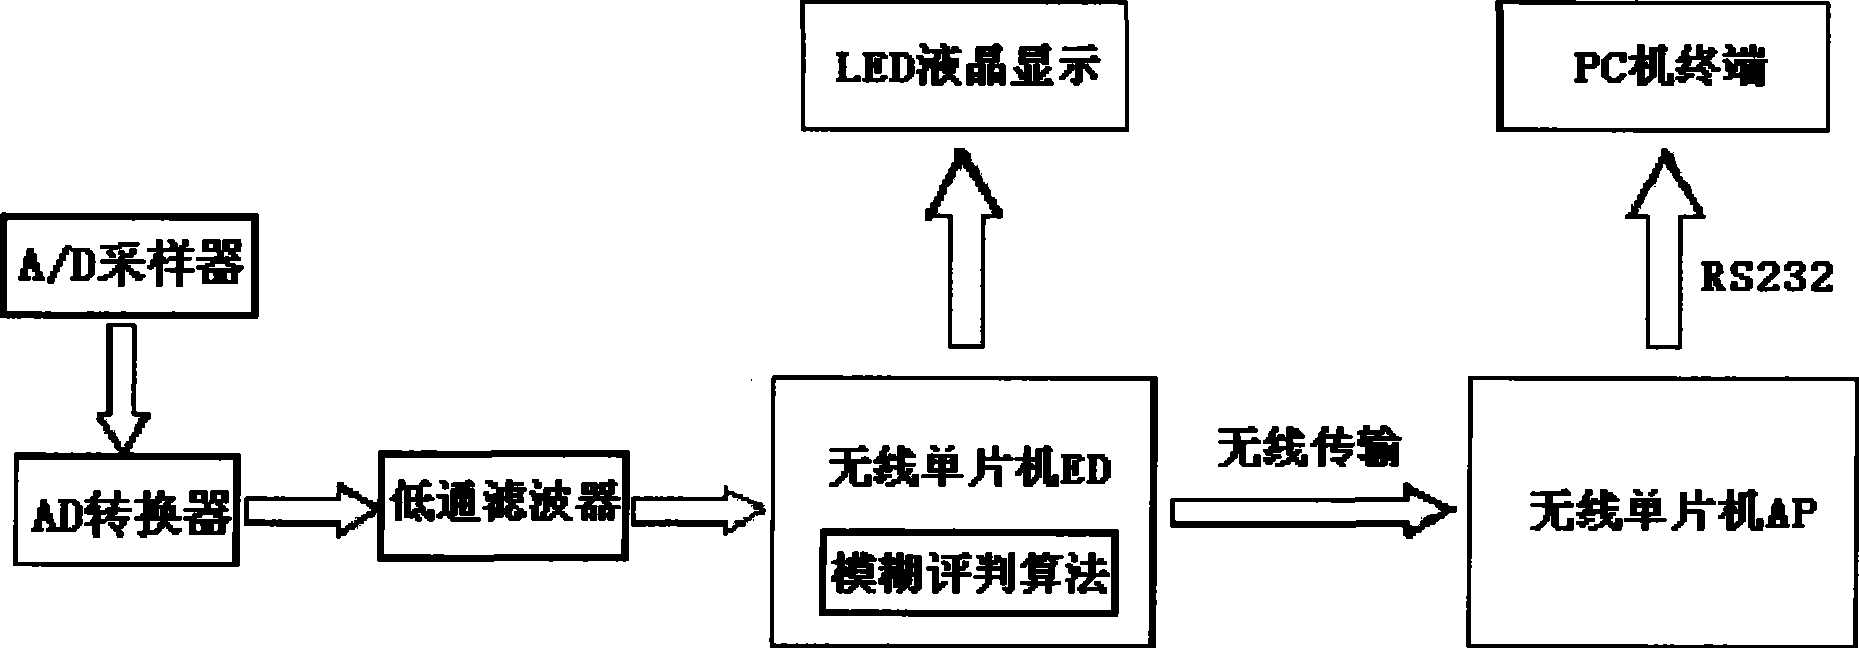 Oil liquid pollution monitoring, cleaning and filtrating apparatus for embedded hydraulic power system